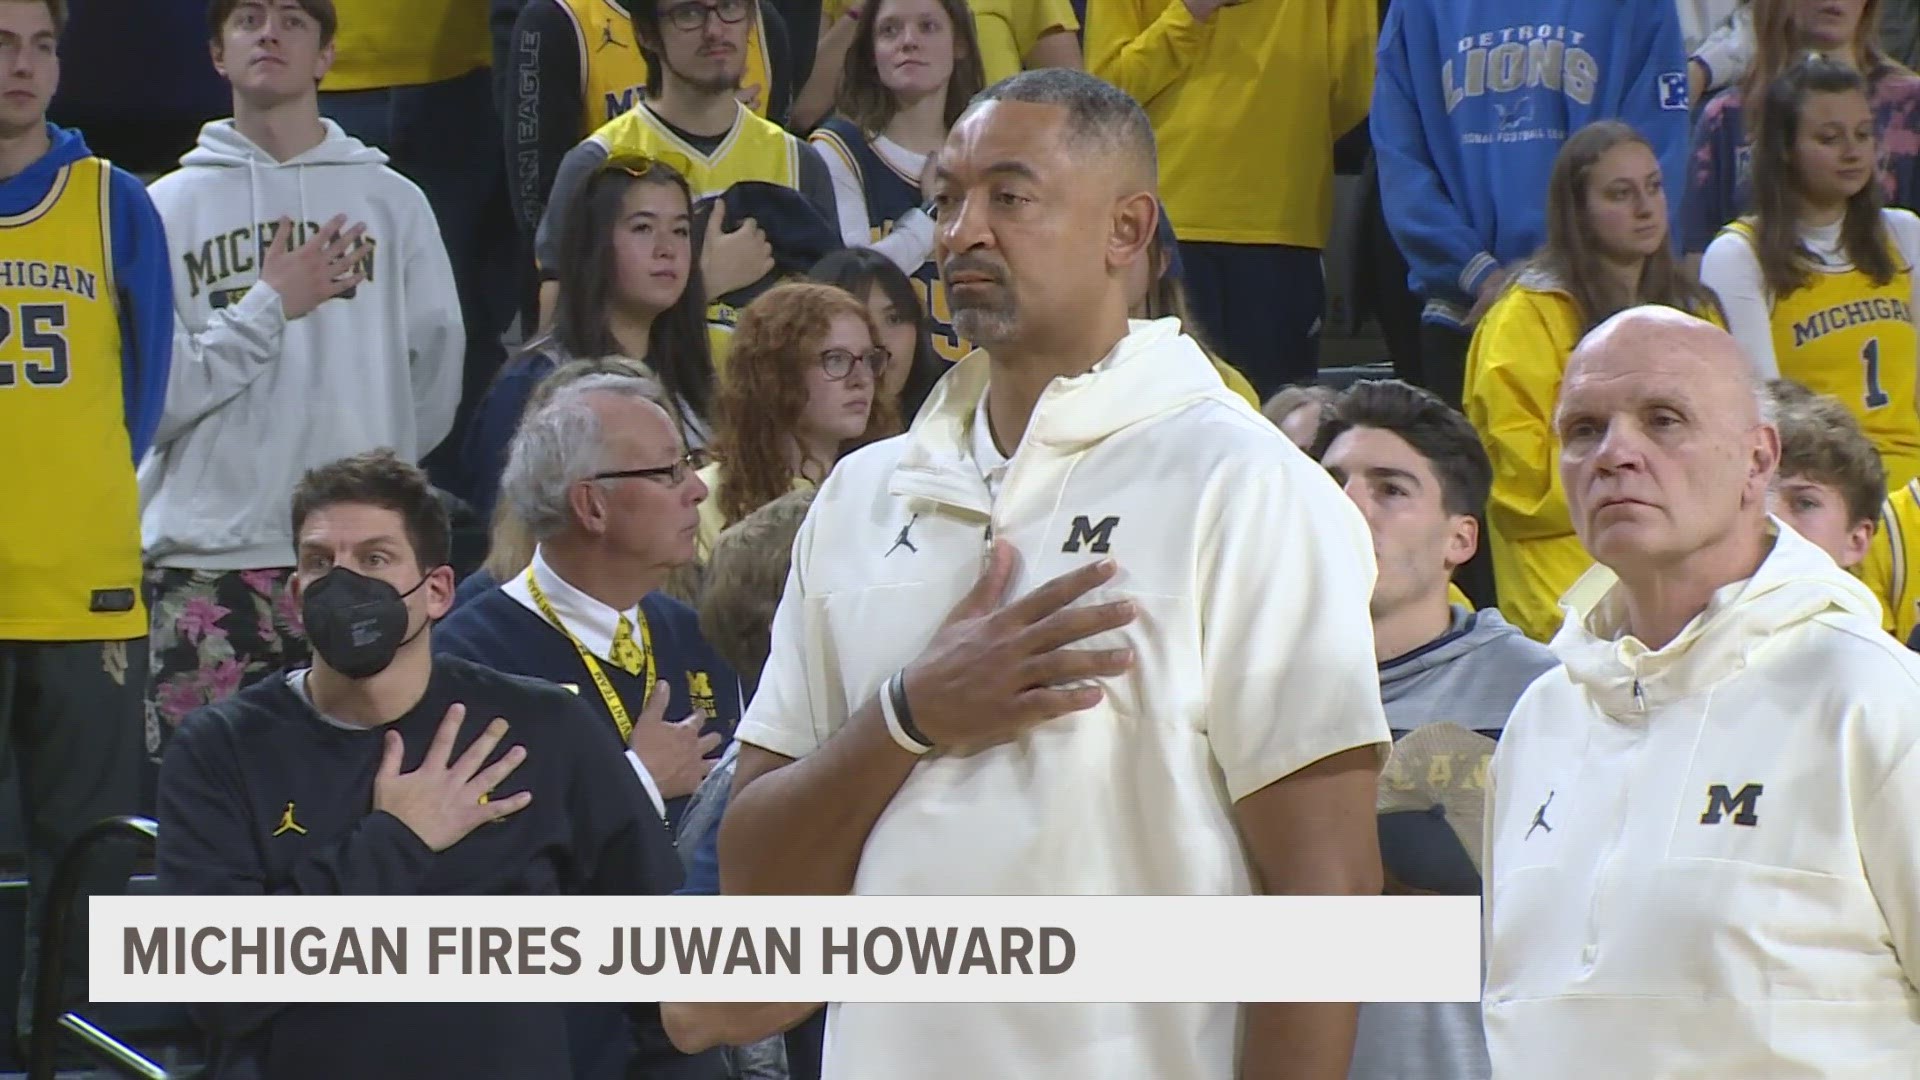 Michigan fired coach Juwan Howard on Friday after five seasons, parting ways with the former Fab Five star.